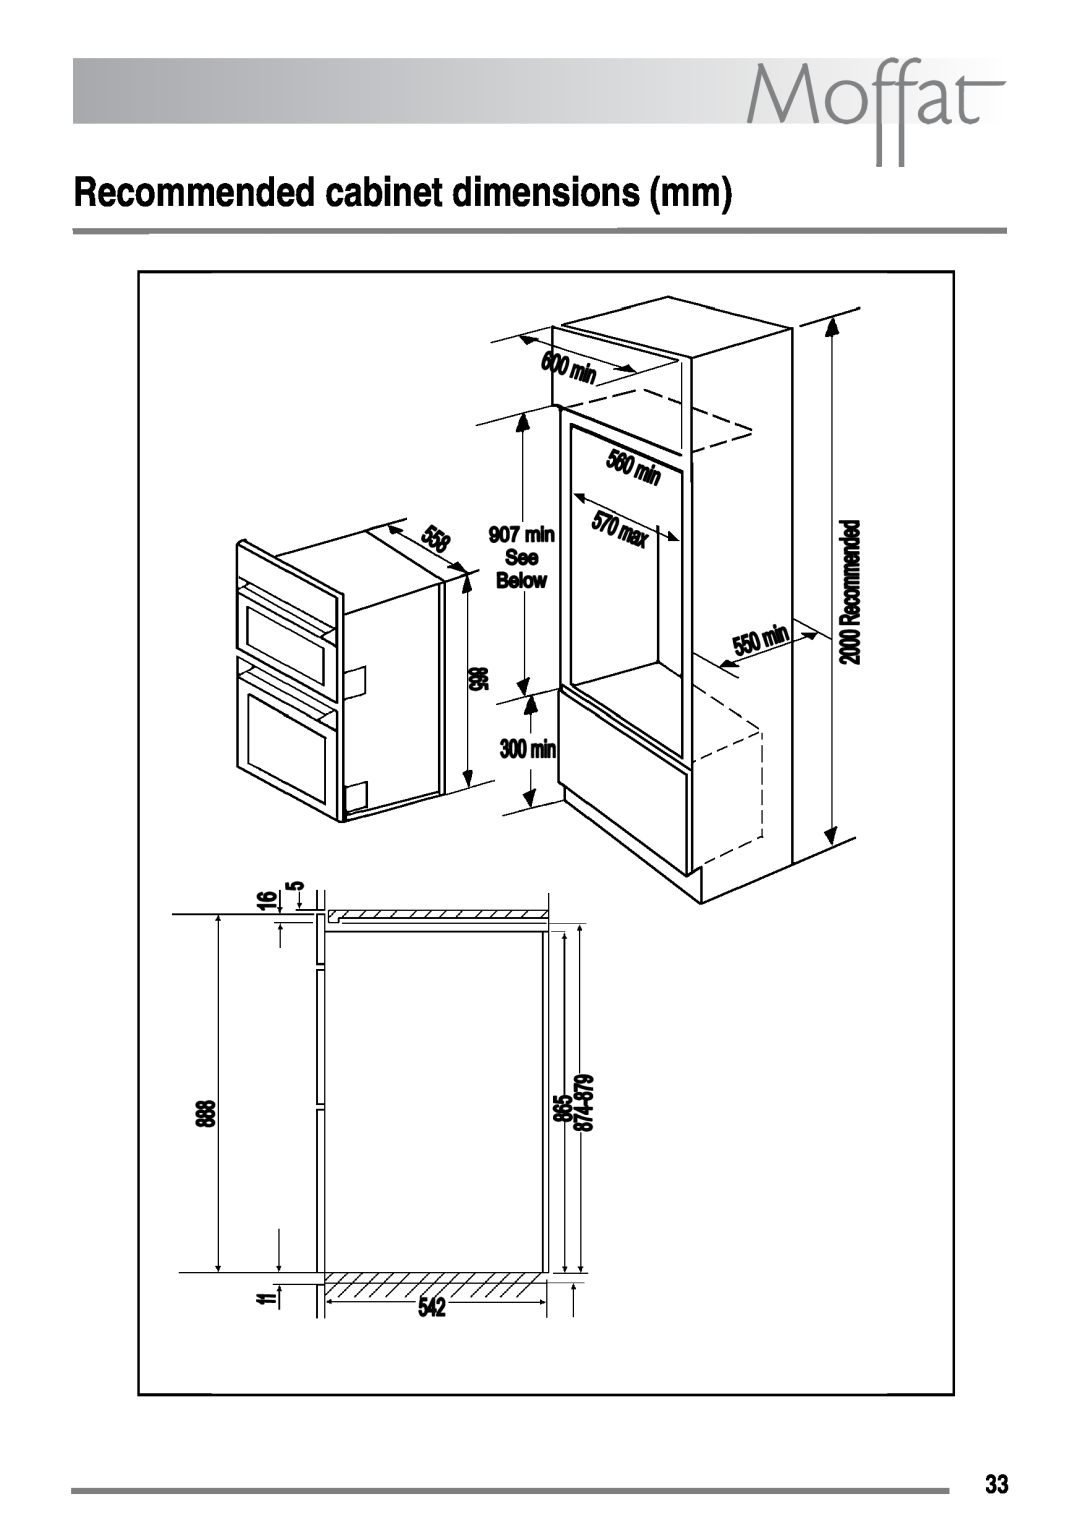 Moffat MDB900 user manual Recommended cabinet dimensions mm 